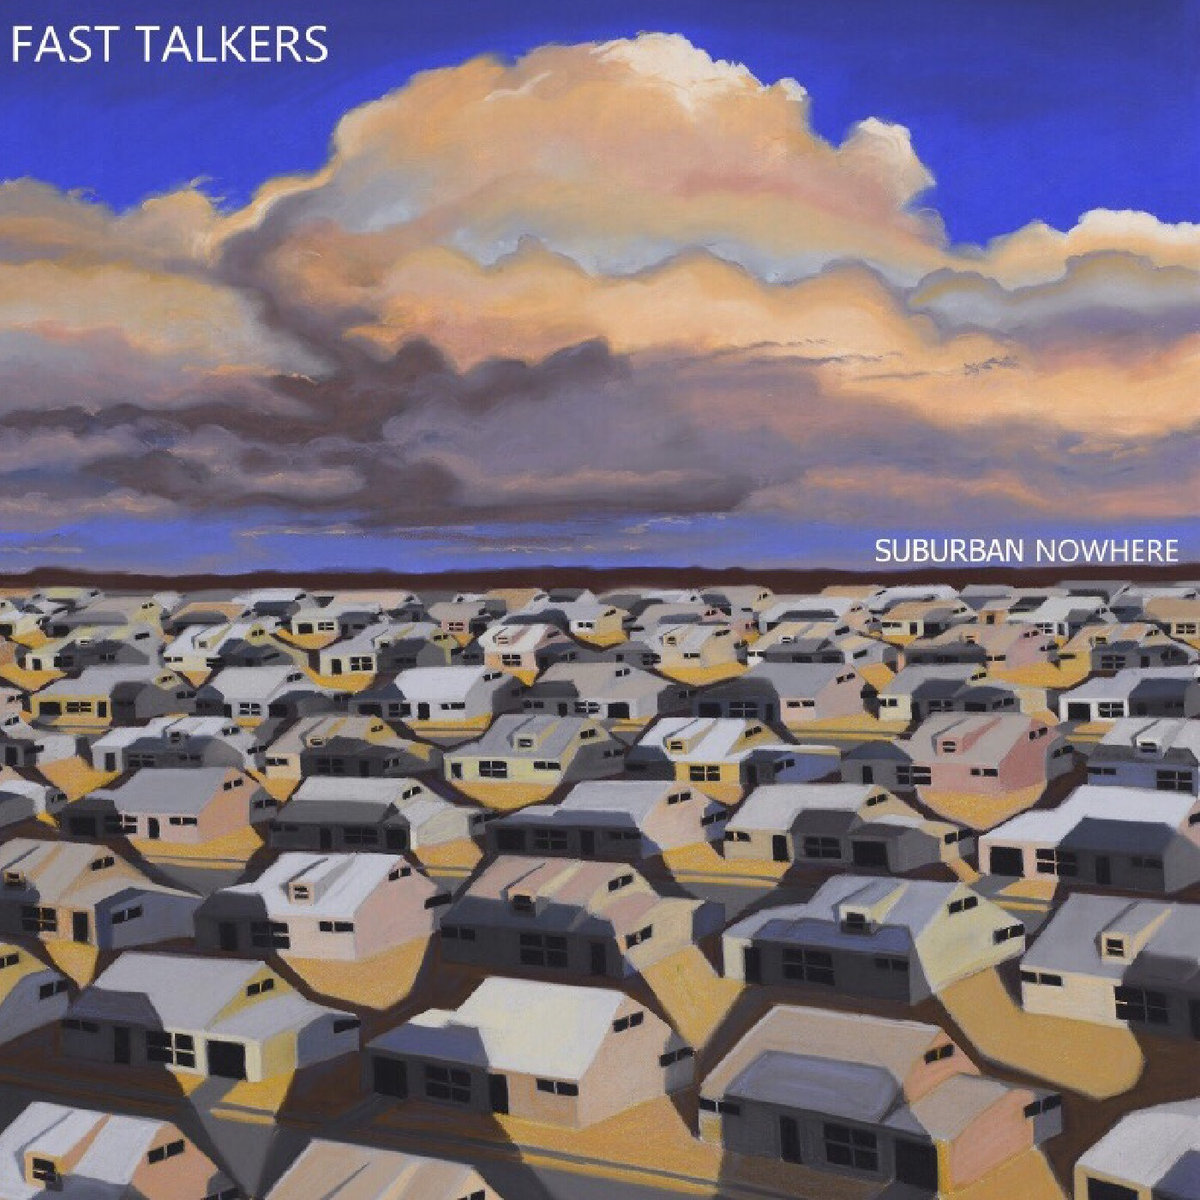  Fast Talkers – Suburban Nowhere